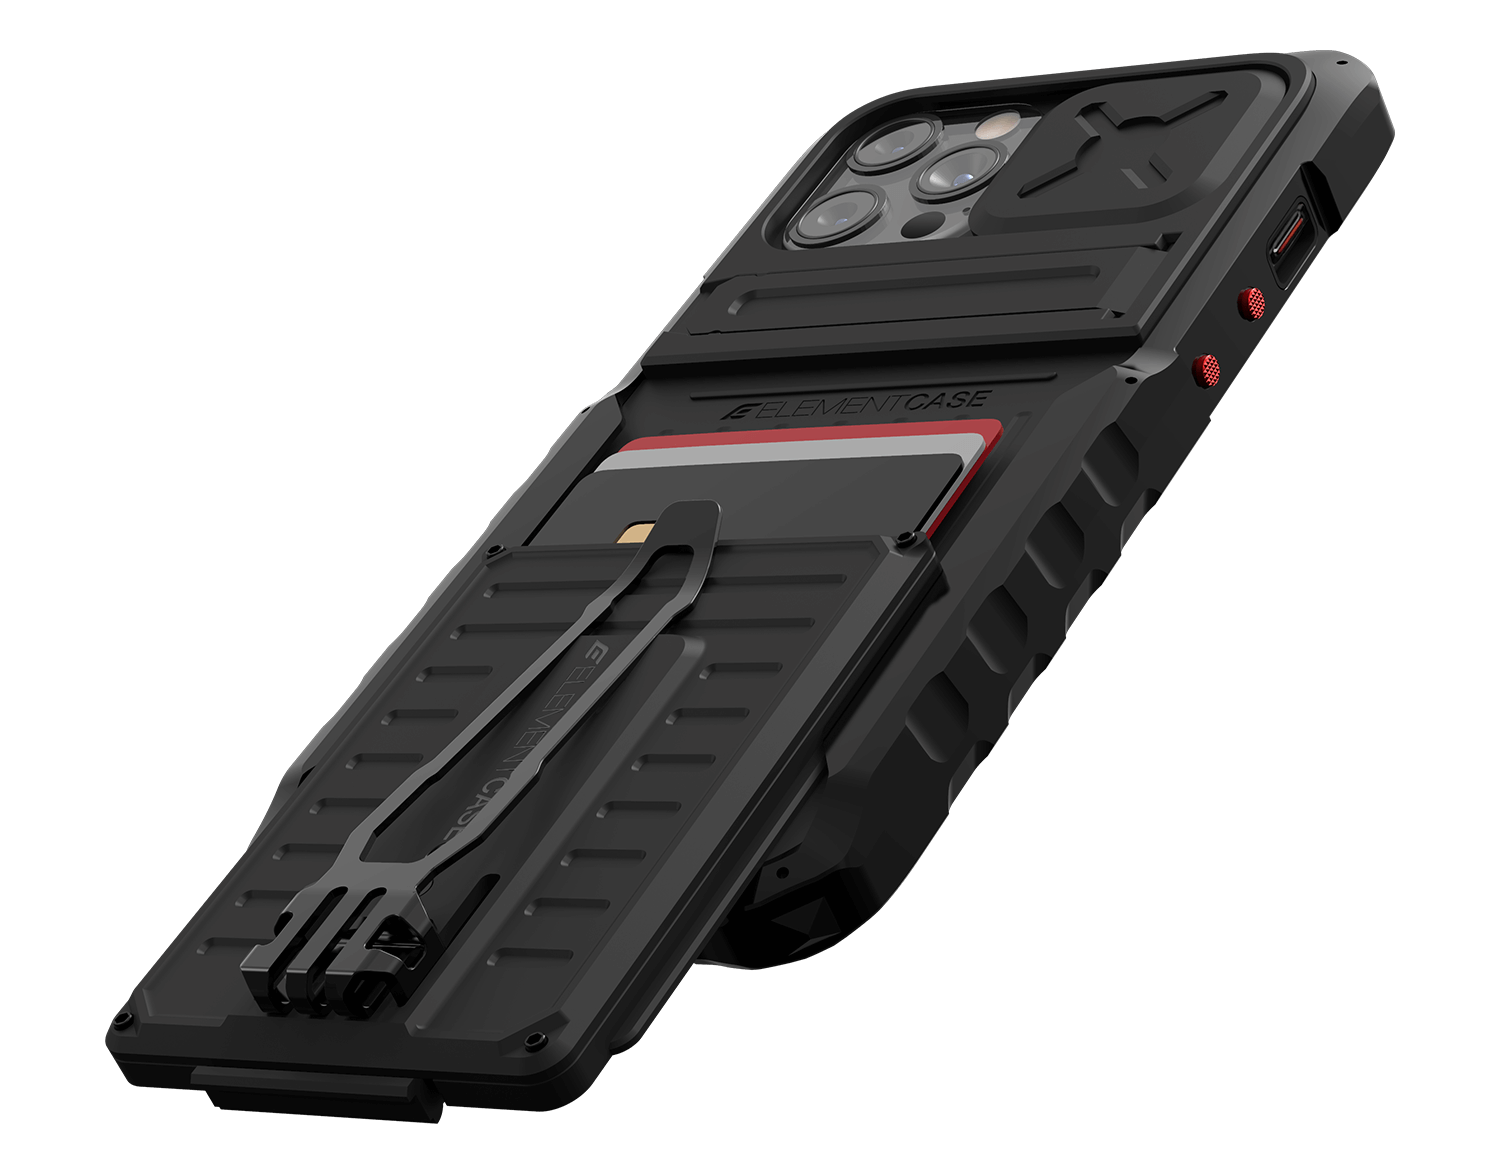 12 pro max case with